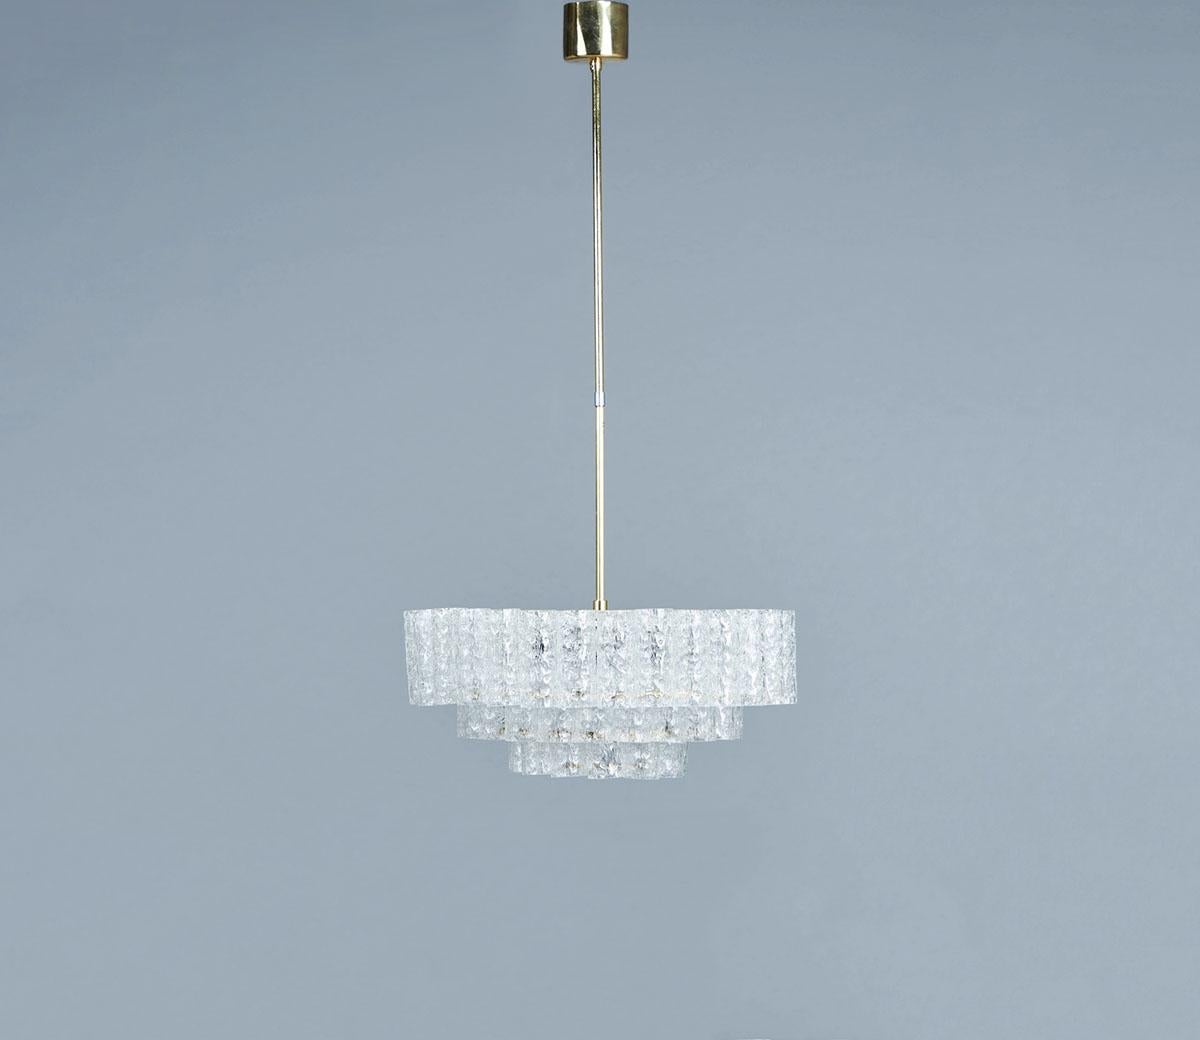 Mid-century modern chandelier produced by Doria Leuchten Germany in the 1960s.

The lamp has a brass frame with 3 rings with hooks.

The loose Murano glass tubes hang on the hooks.

The lamp has 6 E14 sockets sideways and 1 E14 downwards for a nice